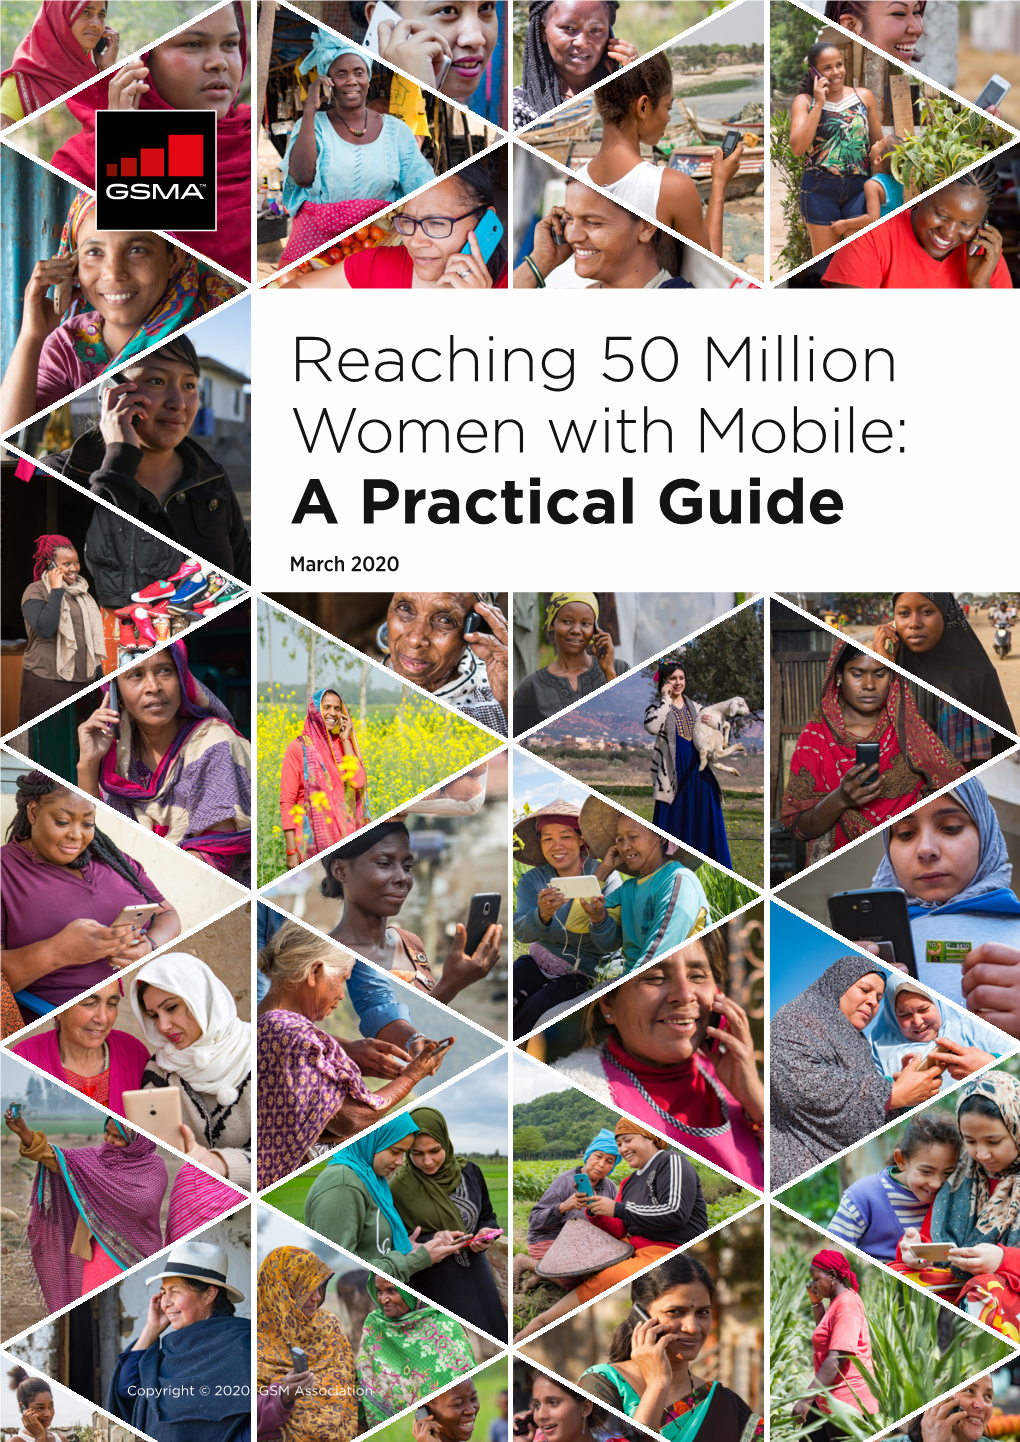 Reaching 50 Million Women with Mobile: a Practical Guide March 2020